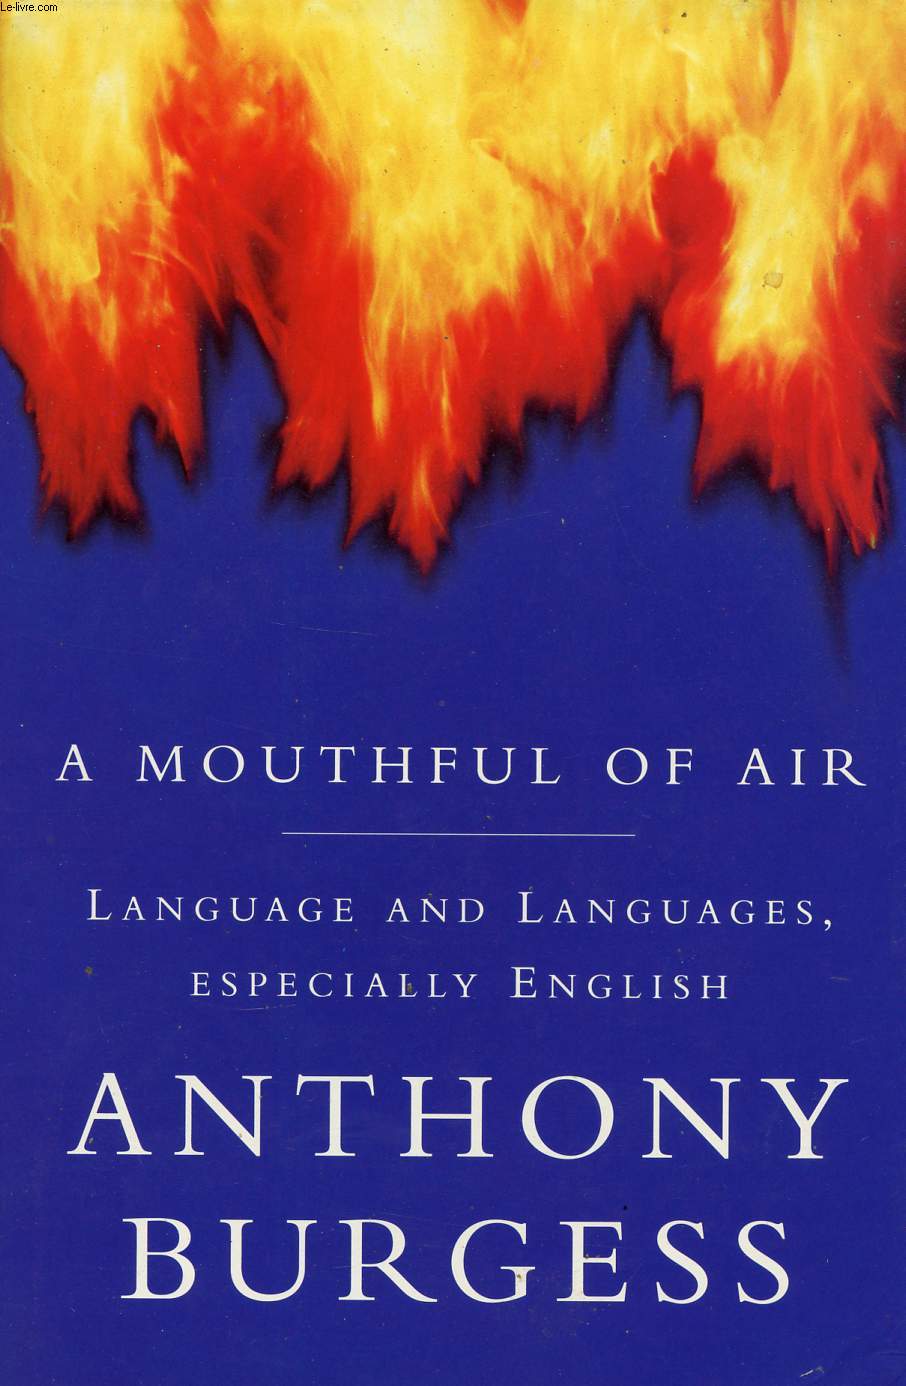 A MOUTHFUL OF AIR, LANGUAGE AND LANGUAGES, ESPECIALLY ENGLISH